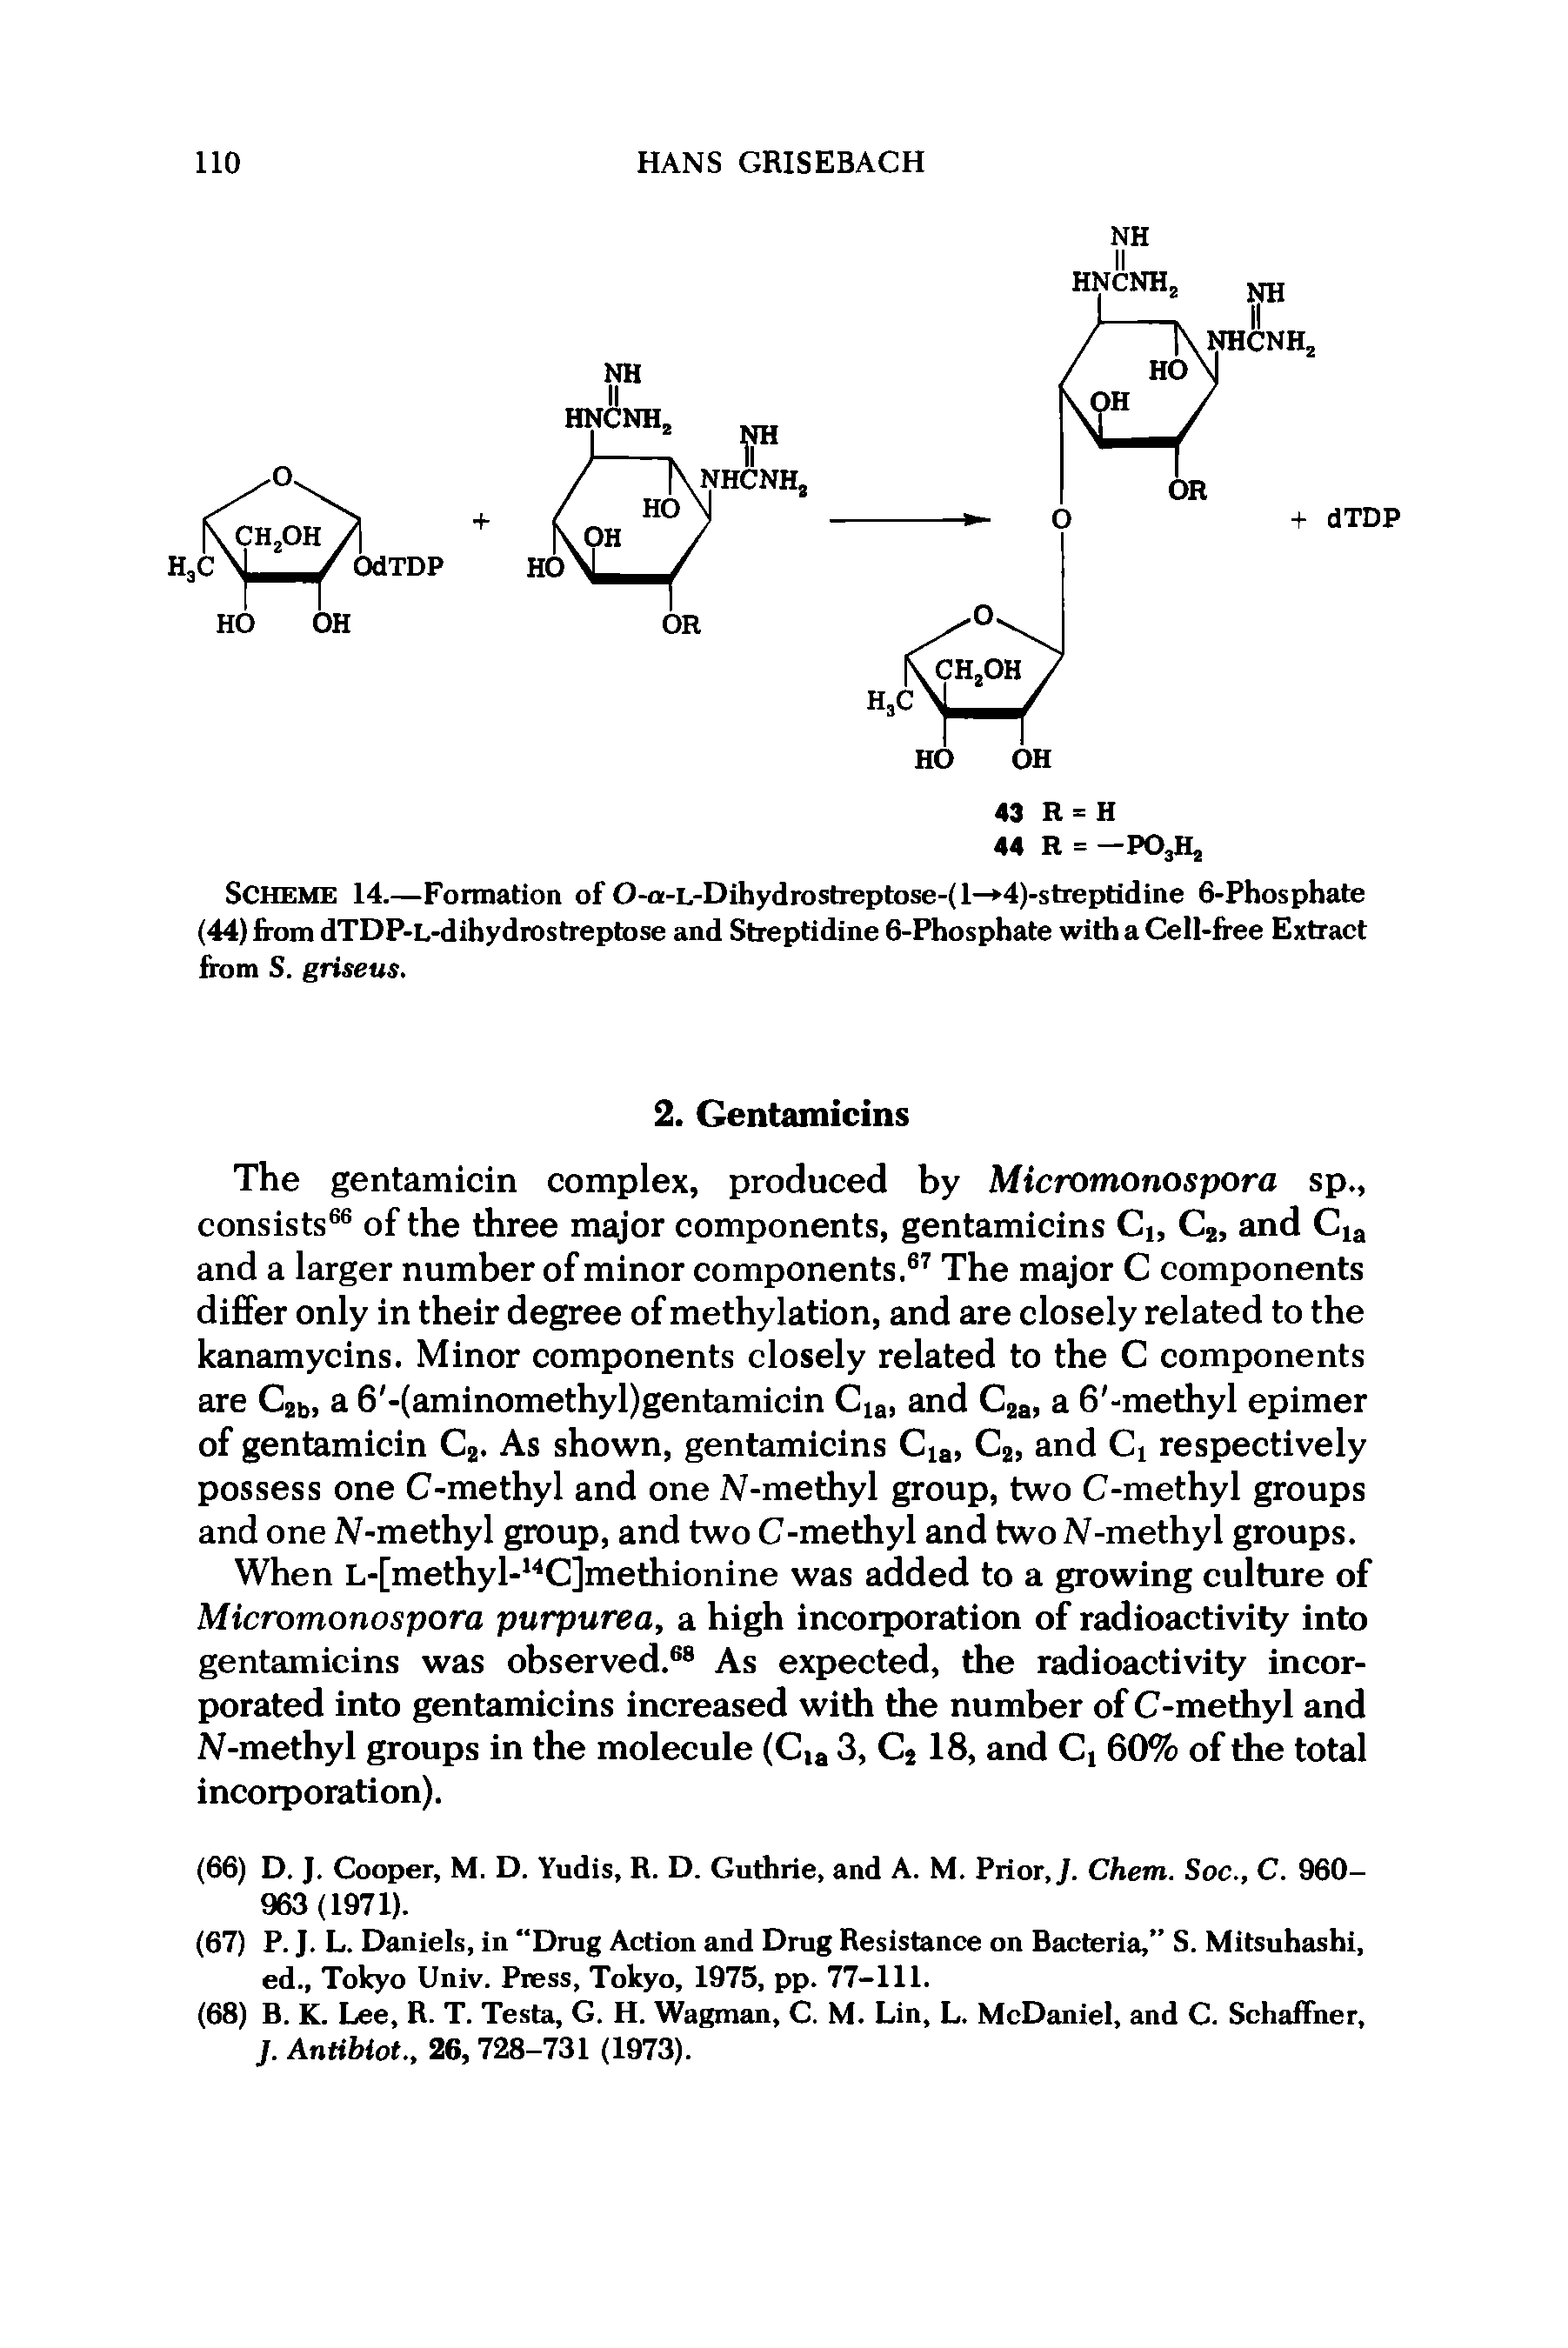 Scheme 14.—Formation of 0-a-L-Dihydrostreptose-(l— 4)-streptidine 6-Phosphate (44) from dTDP-L-dihydrostreptose and Streptidine 6-Phosphate with a Cell-free Extract from S. griseus.